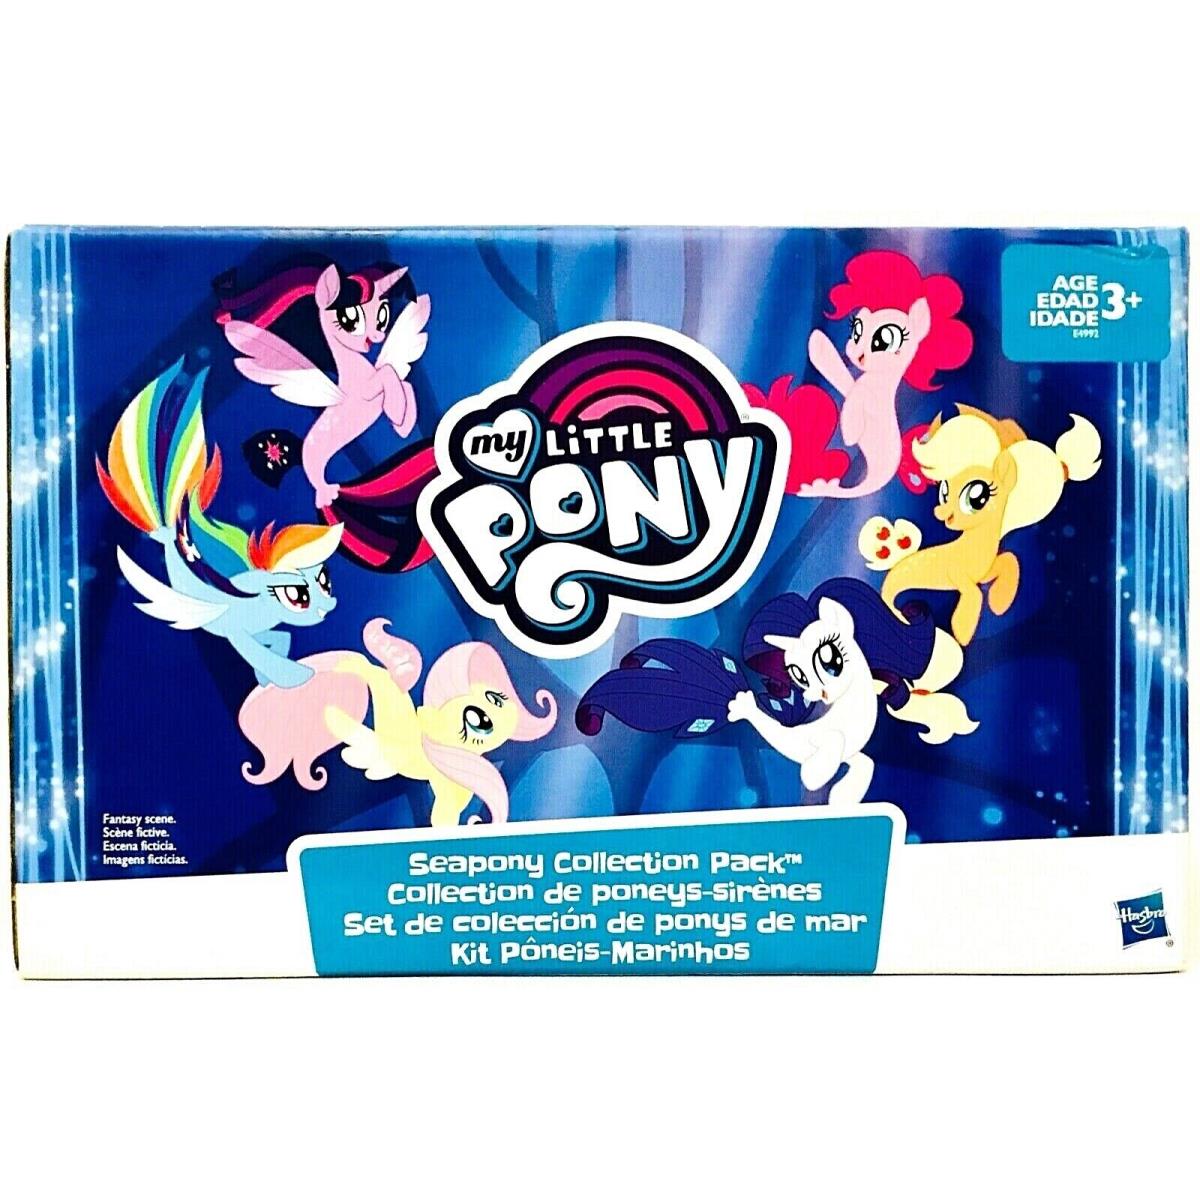 Hasbro My Little Pony Seapony Collection Pack Includes 6 Seapony Figures 3 Up